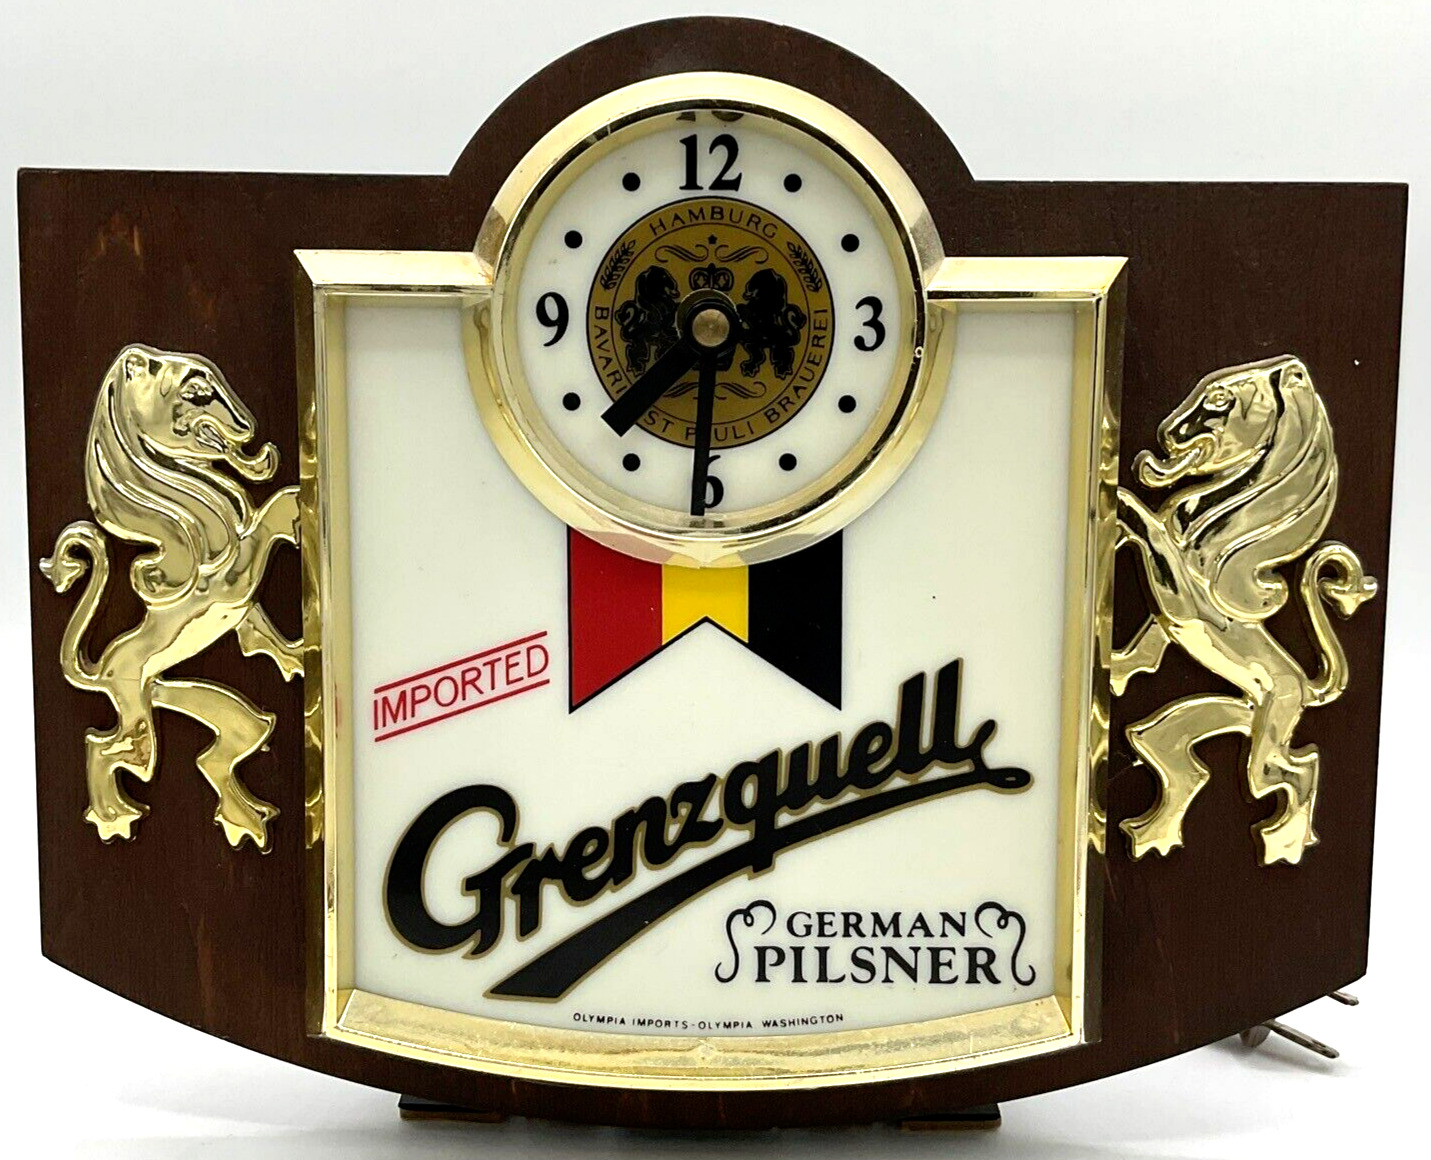 Vintage Olympia Imports Imported Grenzquell German Pilsner Lighted Sign Clock WA